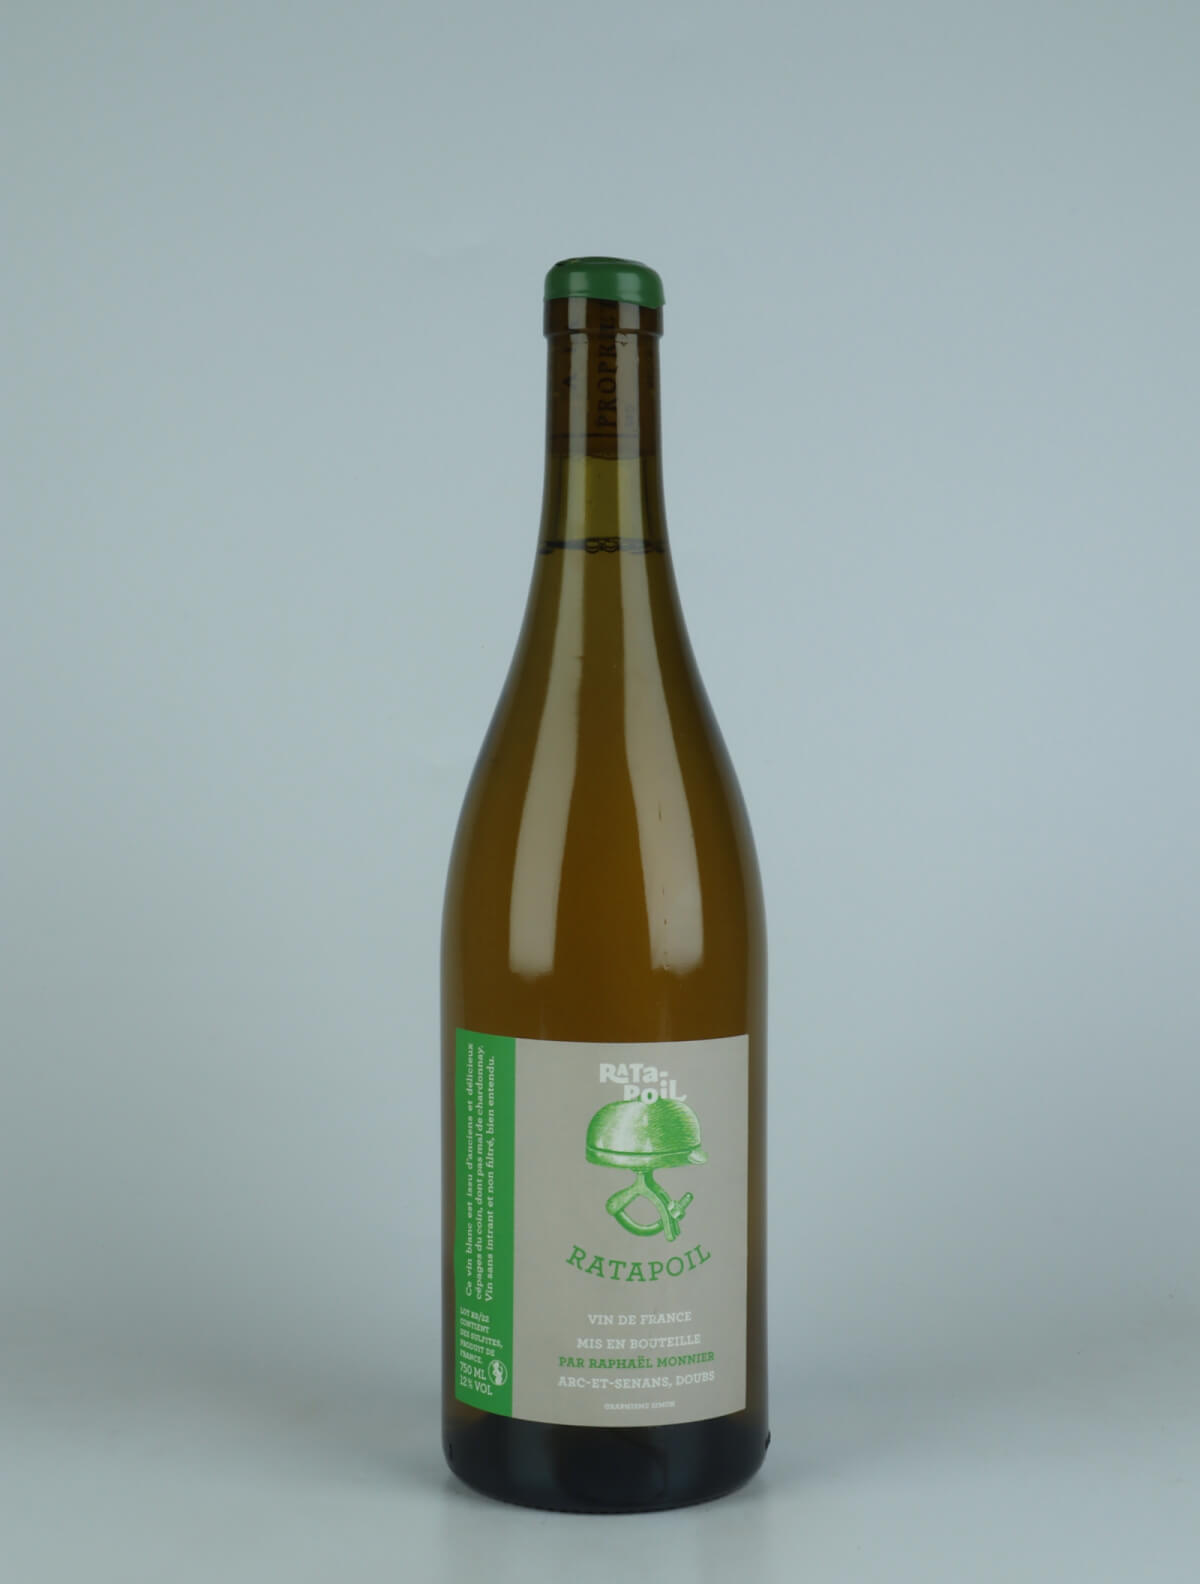 A bottle 2022 Ratapoil Blanc (Green label) White wine from Domaine Ratapoil, Jura in France